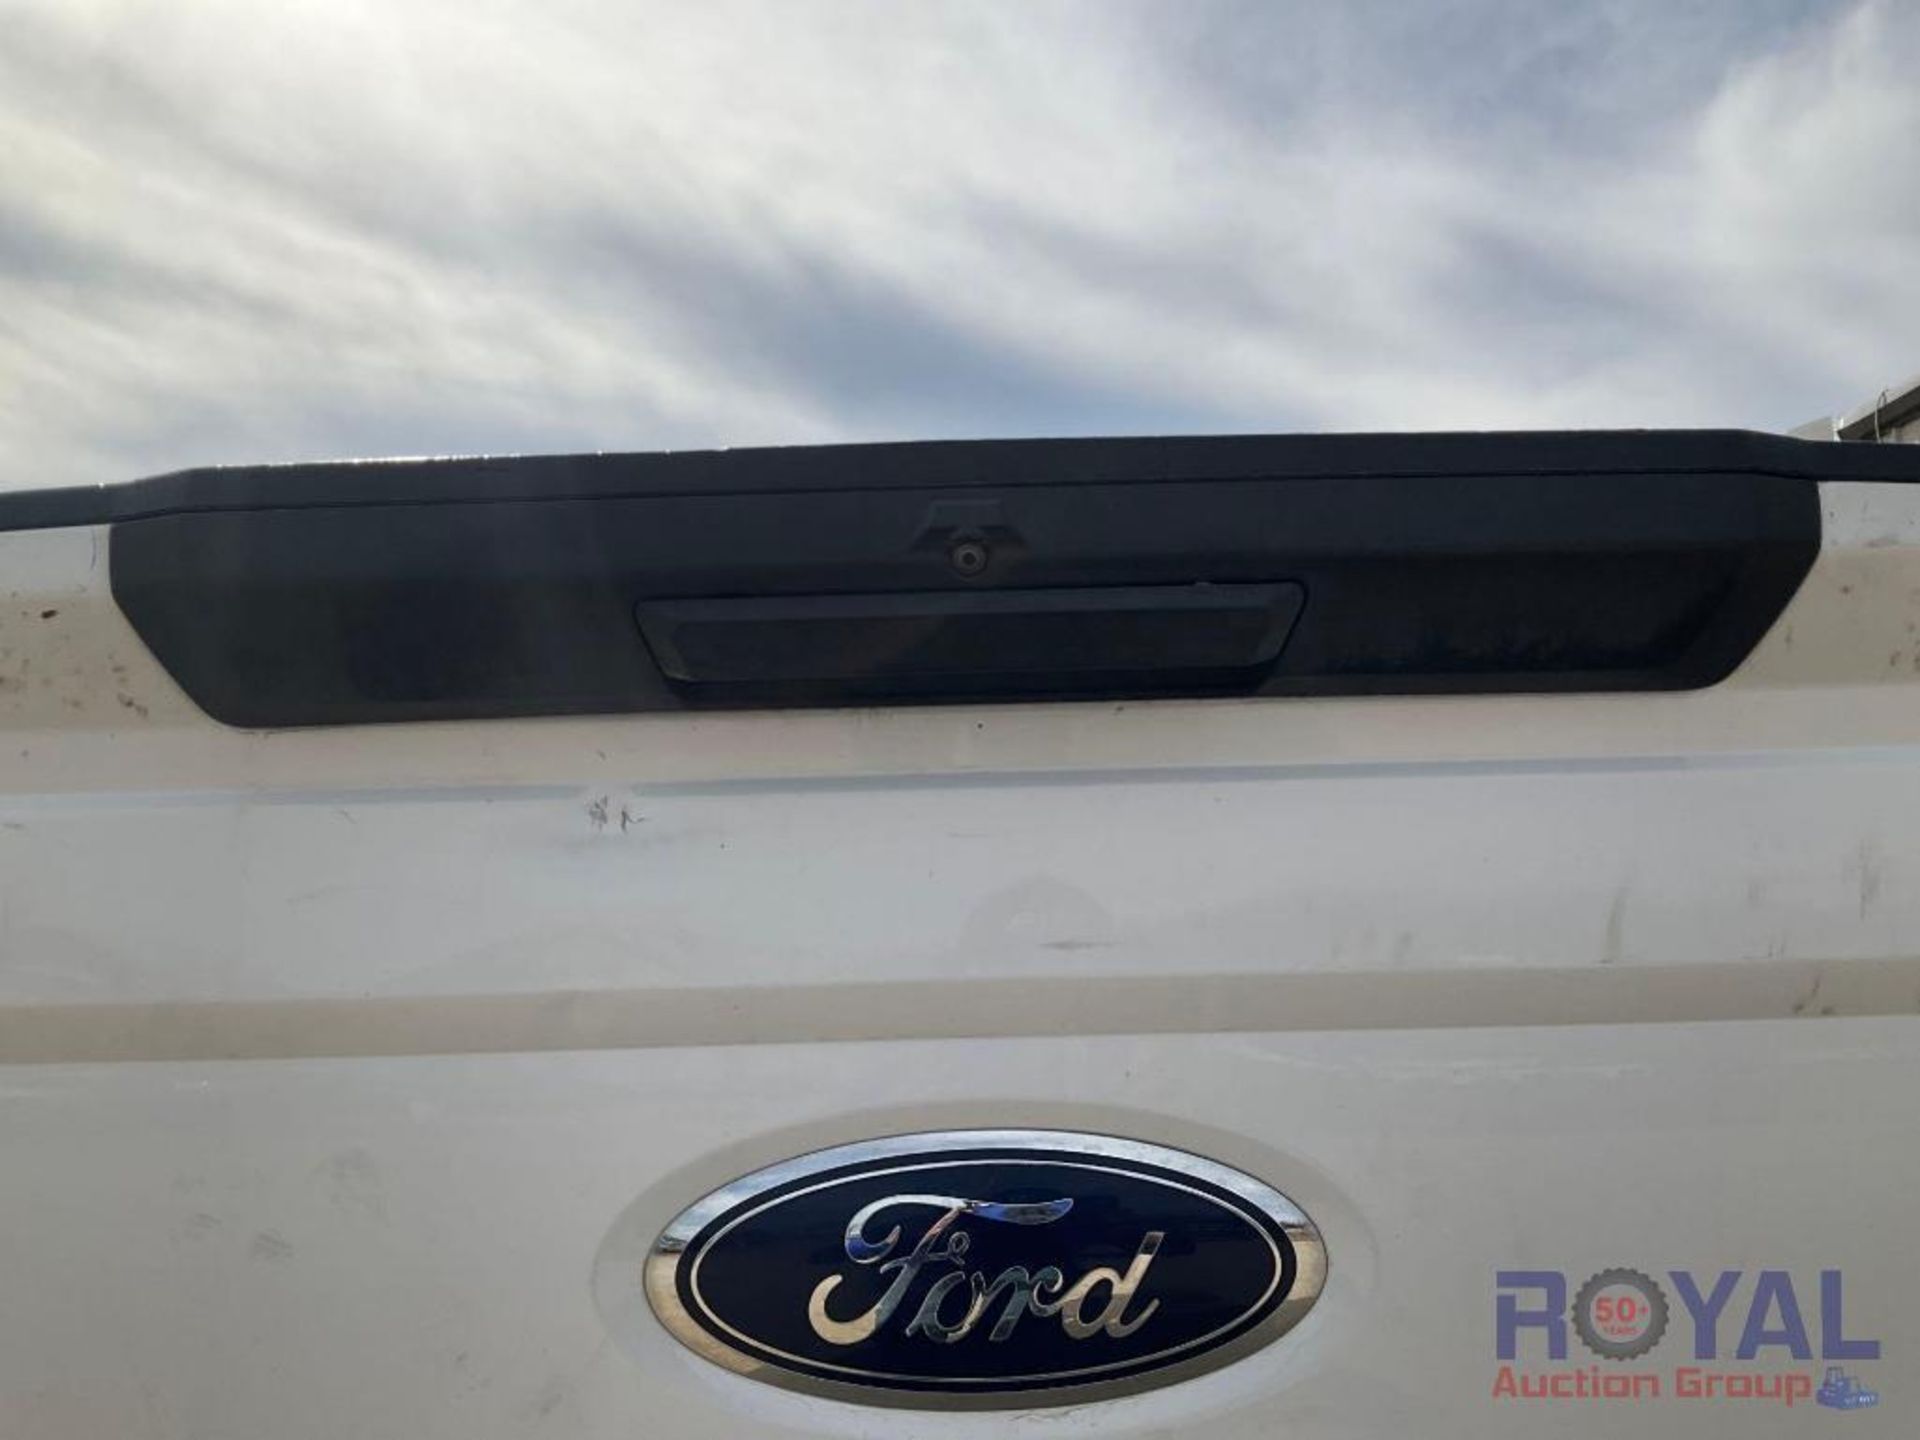 2019 Ford F250 4x4 Crew Cab Pickup Truck - Image 11 of 27